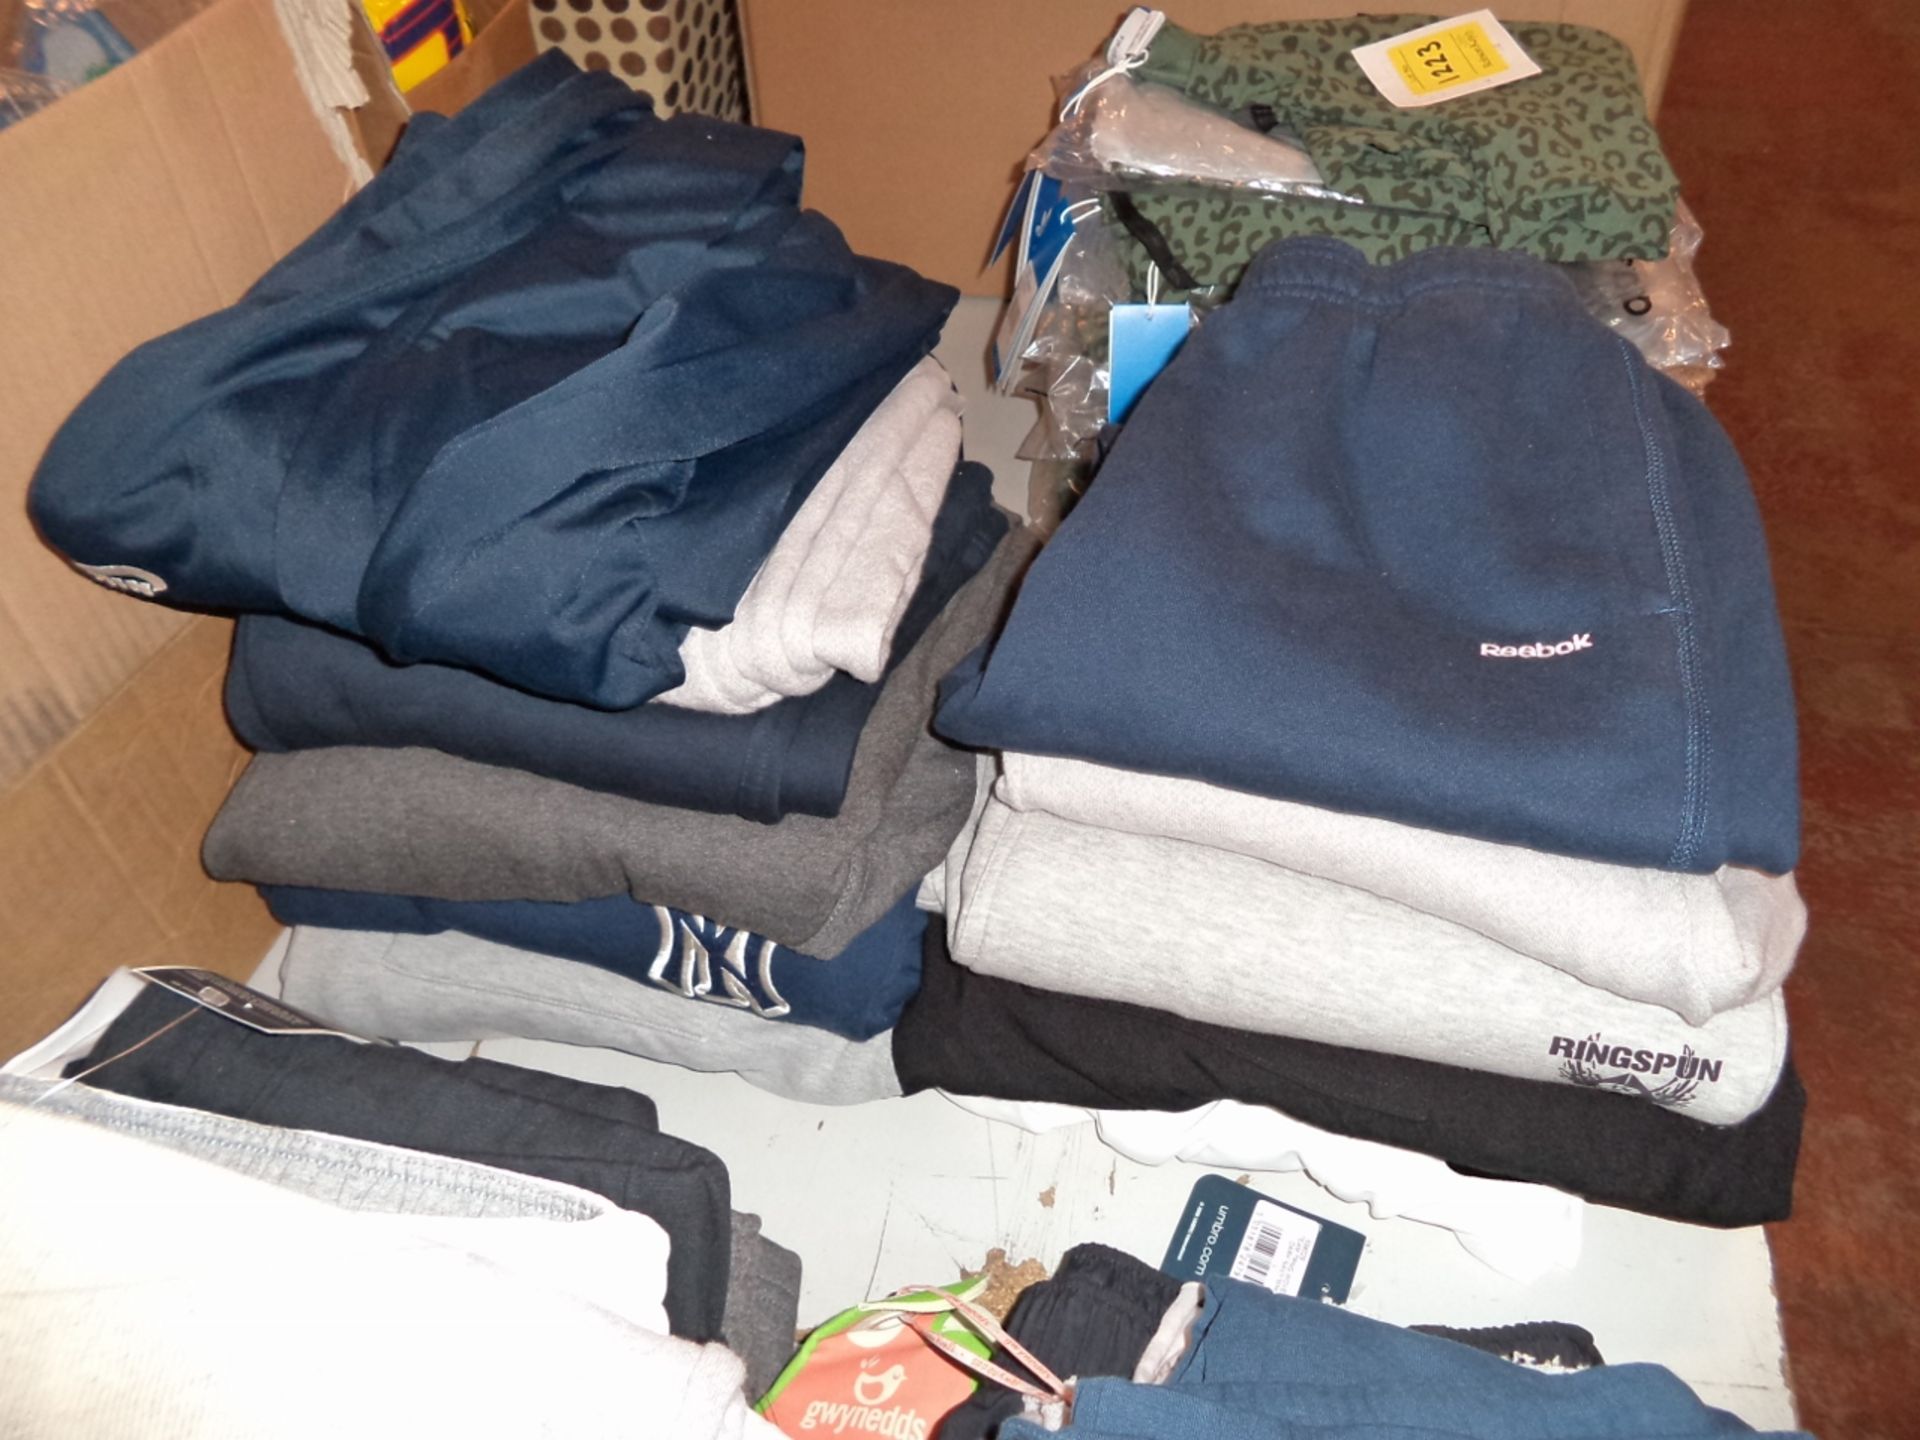 22 assorted pairs of sweatpants by Ringspun, Reebok, Asics and others - Image 3 of 3